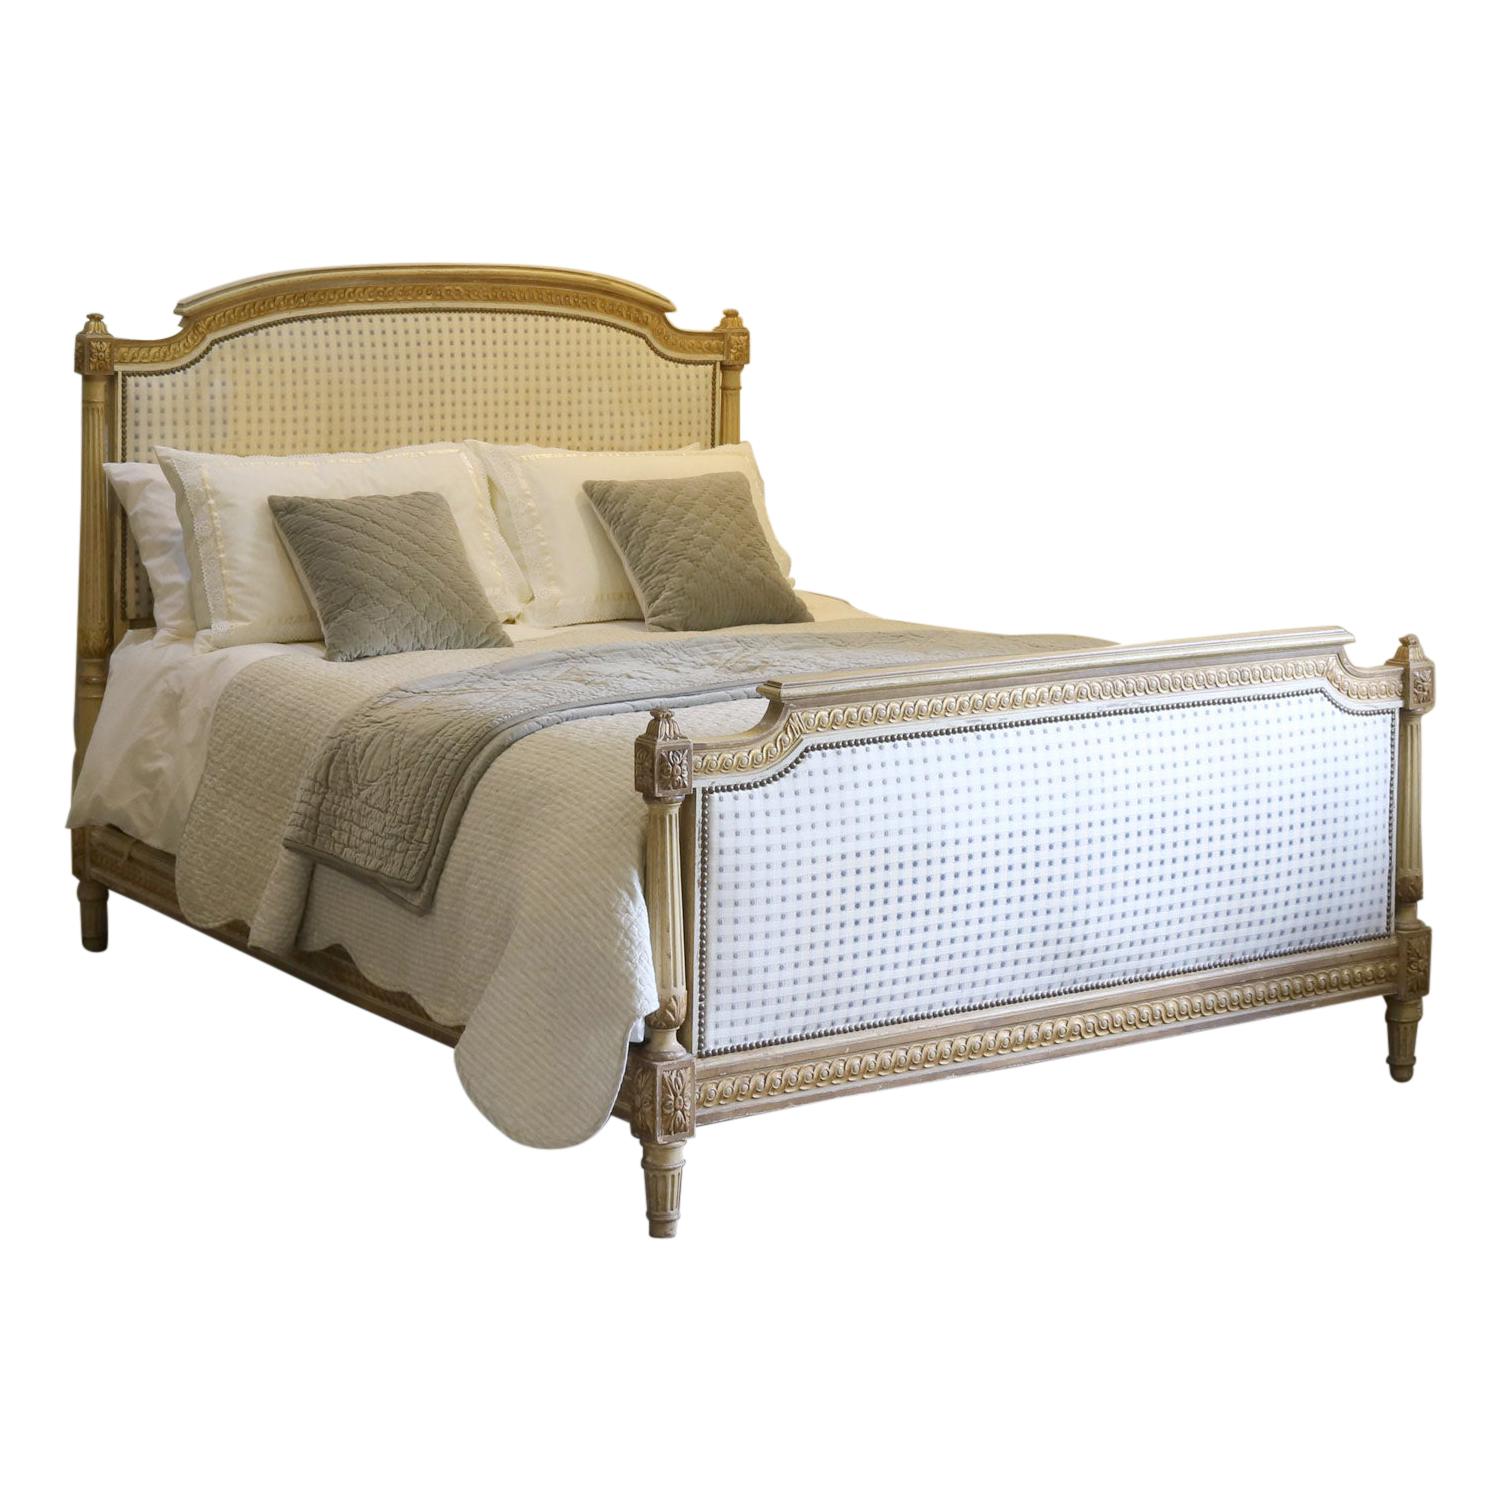 Louis XVI Style Bed with Upholstered Panels WK154